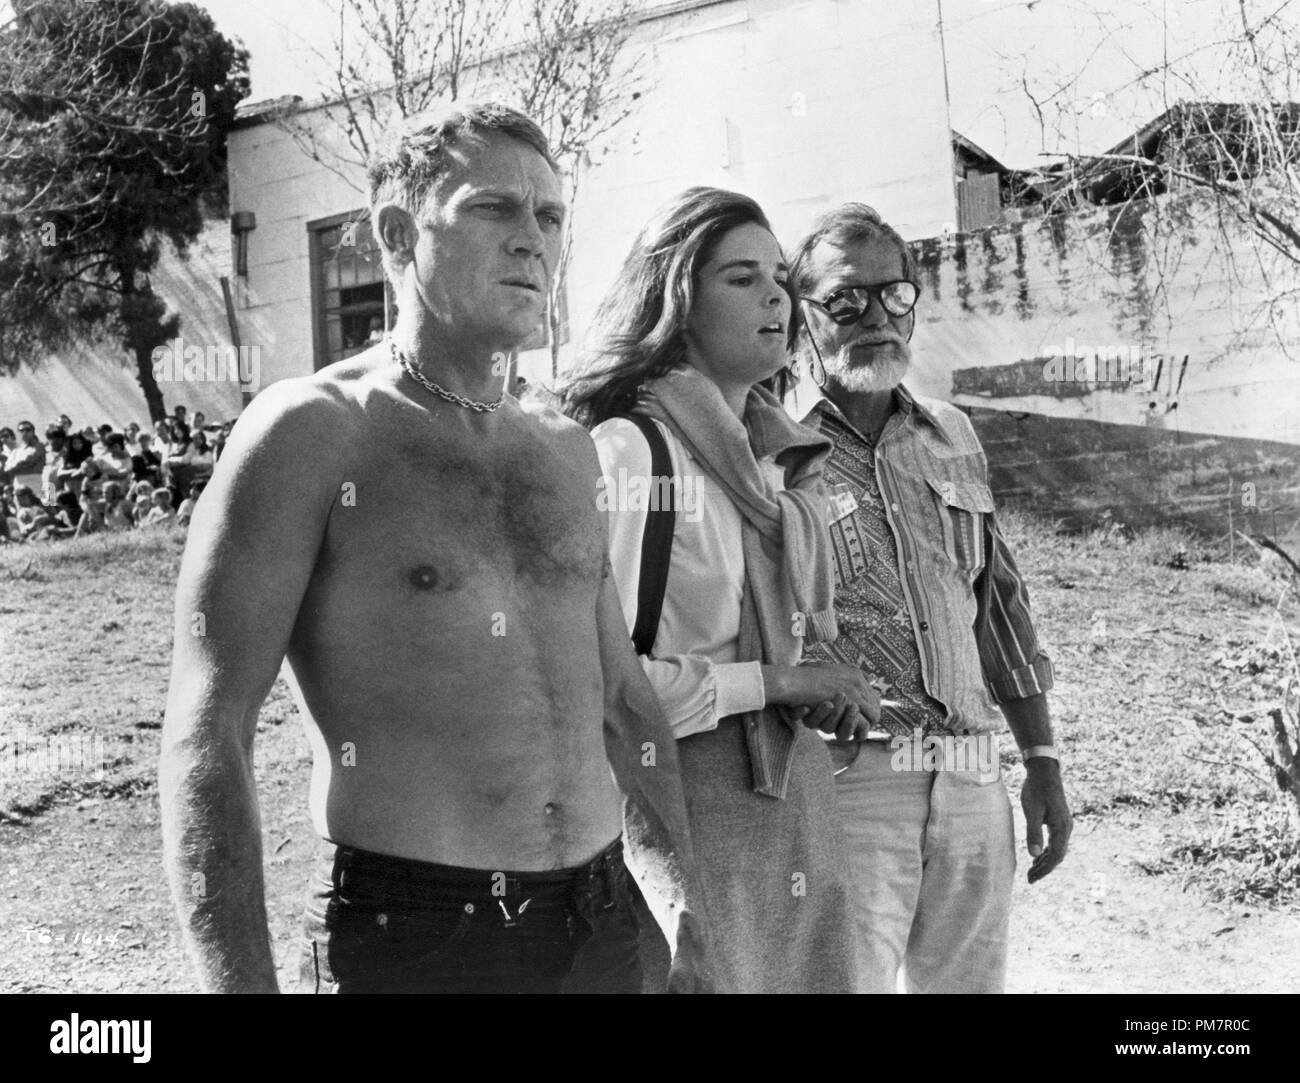 Studio Publicity Still: Steve McQueen, Ali MacGraw and Director Sam Peckinpah 'The Getaway'  1972 Warner       File Reference # 31386 1087THA Stock Photo